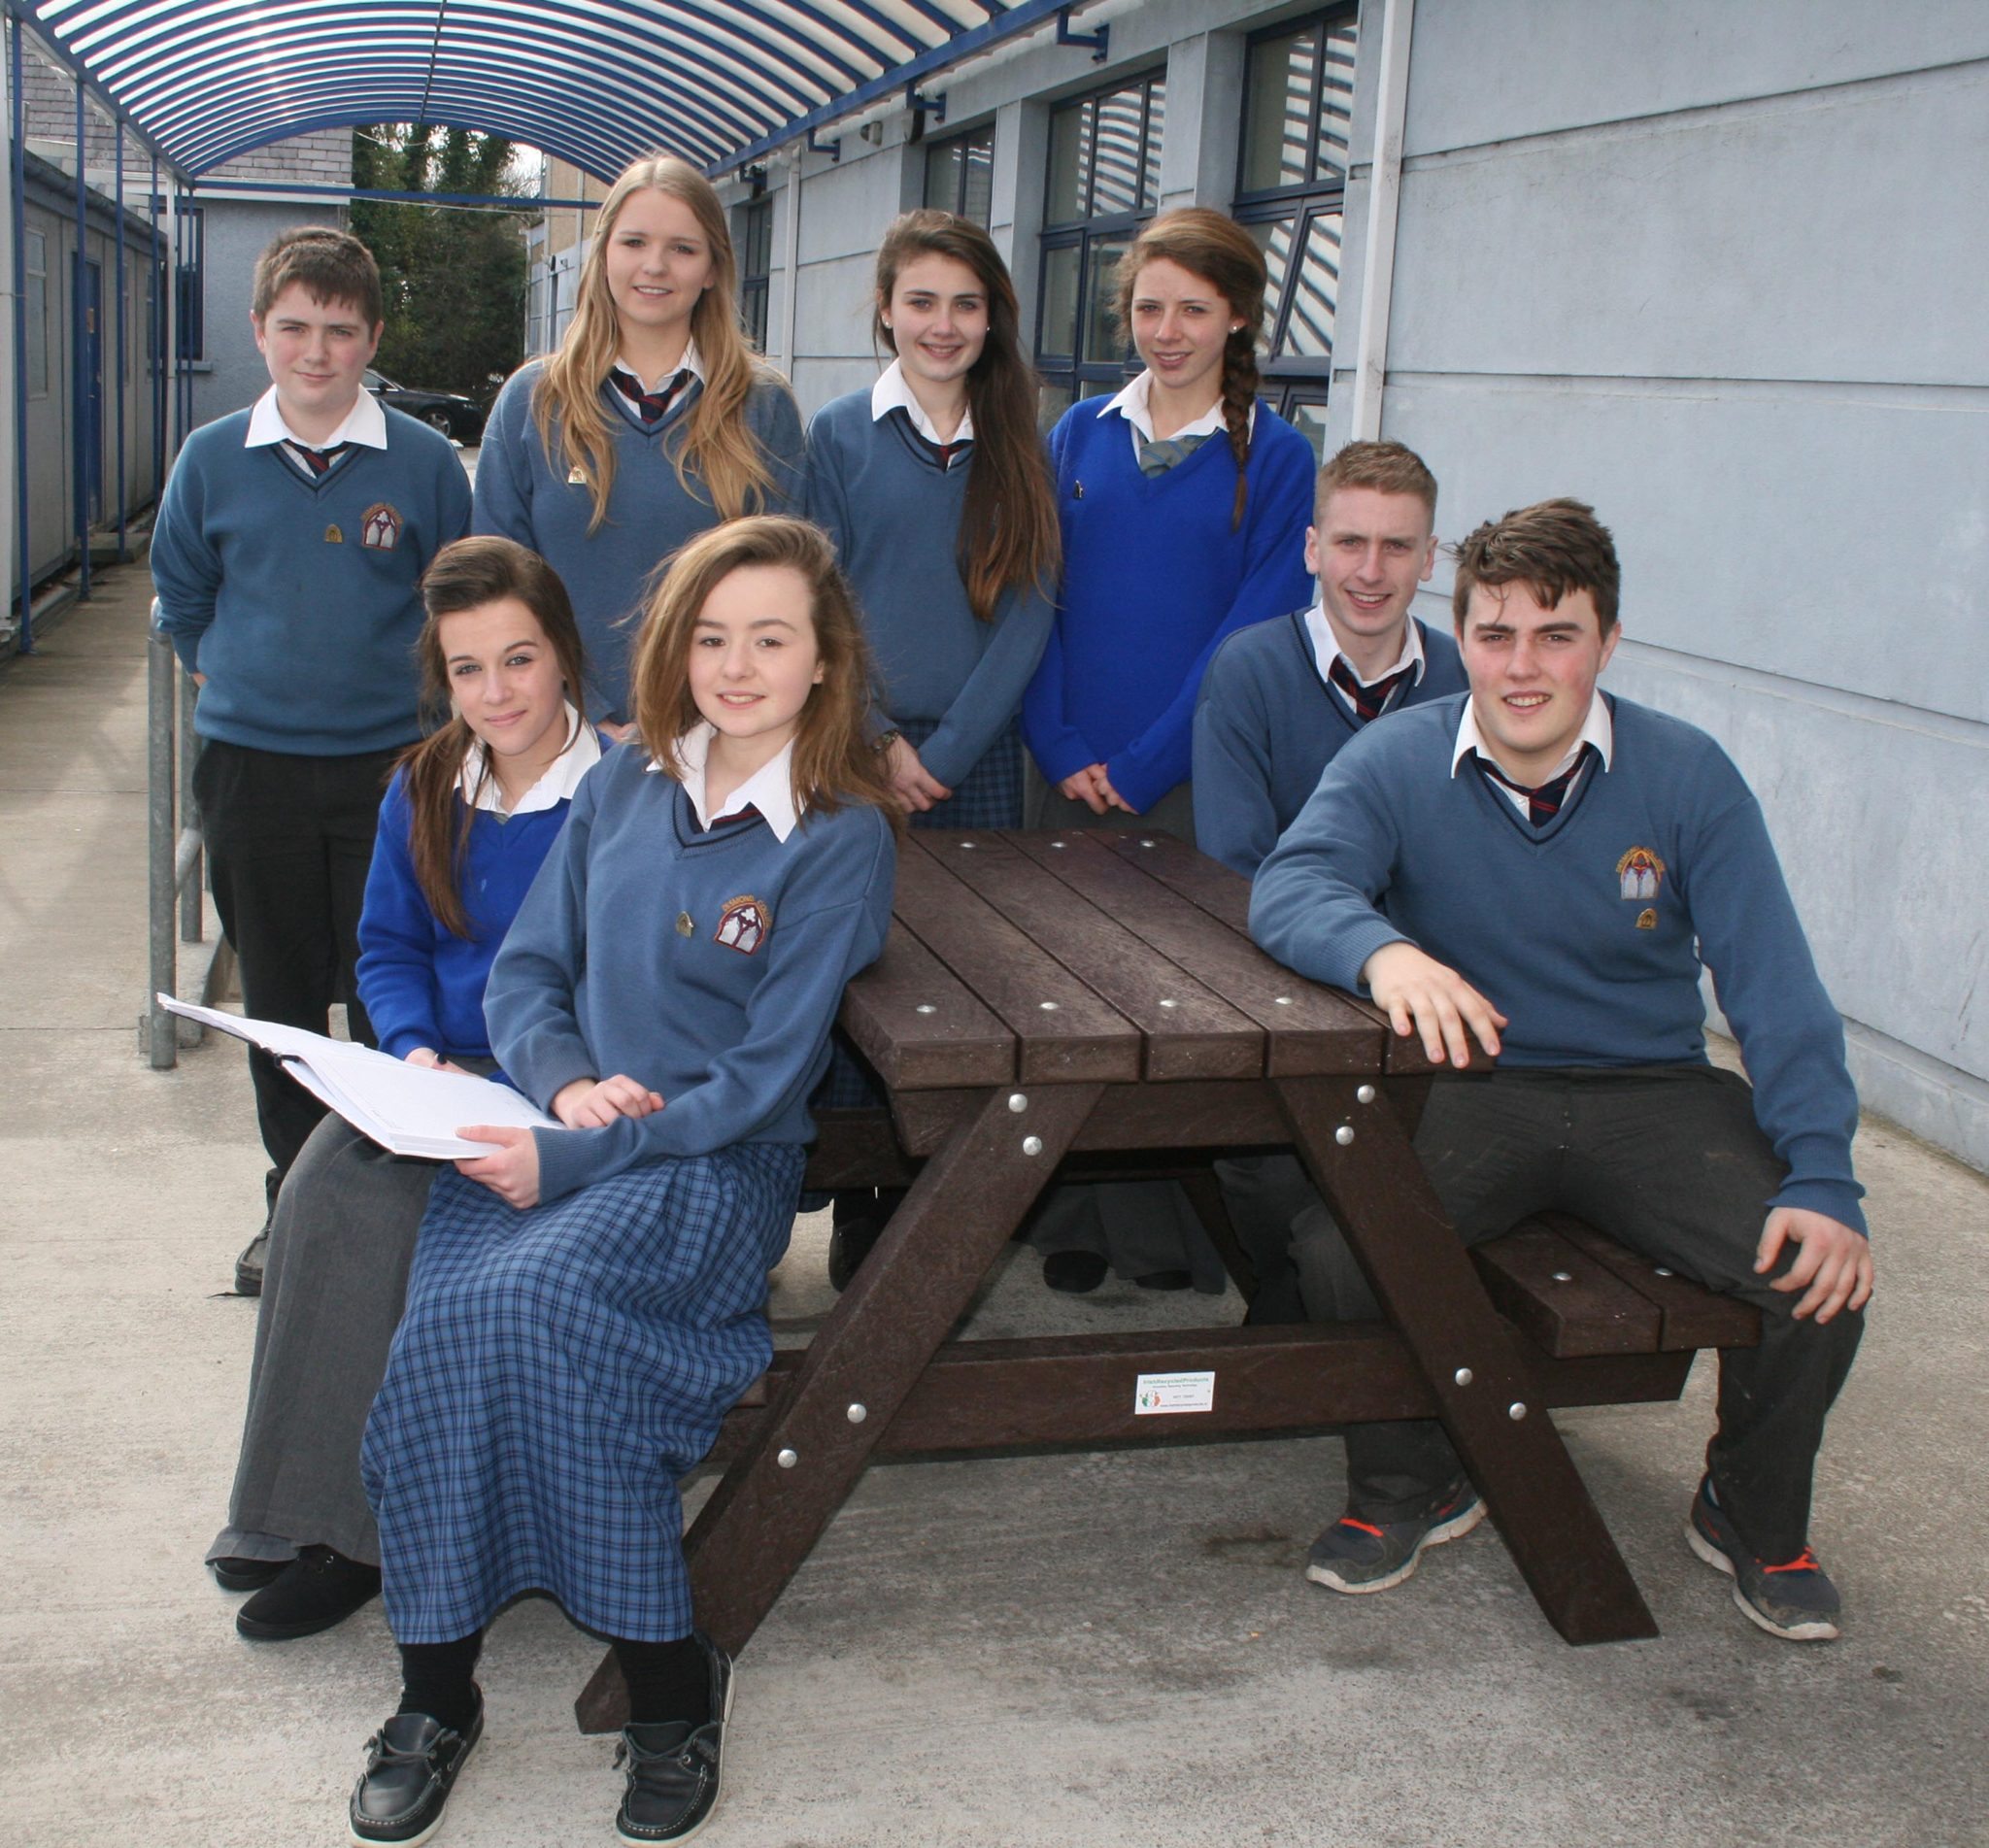 Desmond College Student Council Members 2013-2014